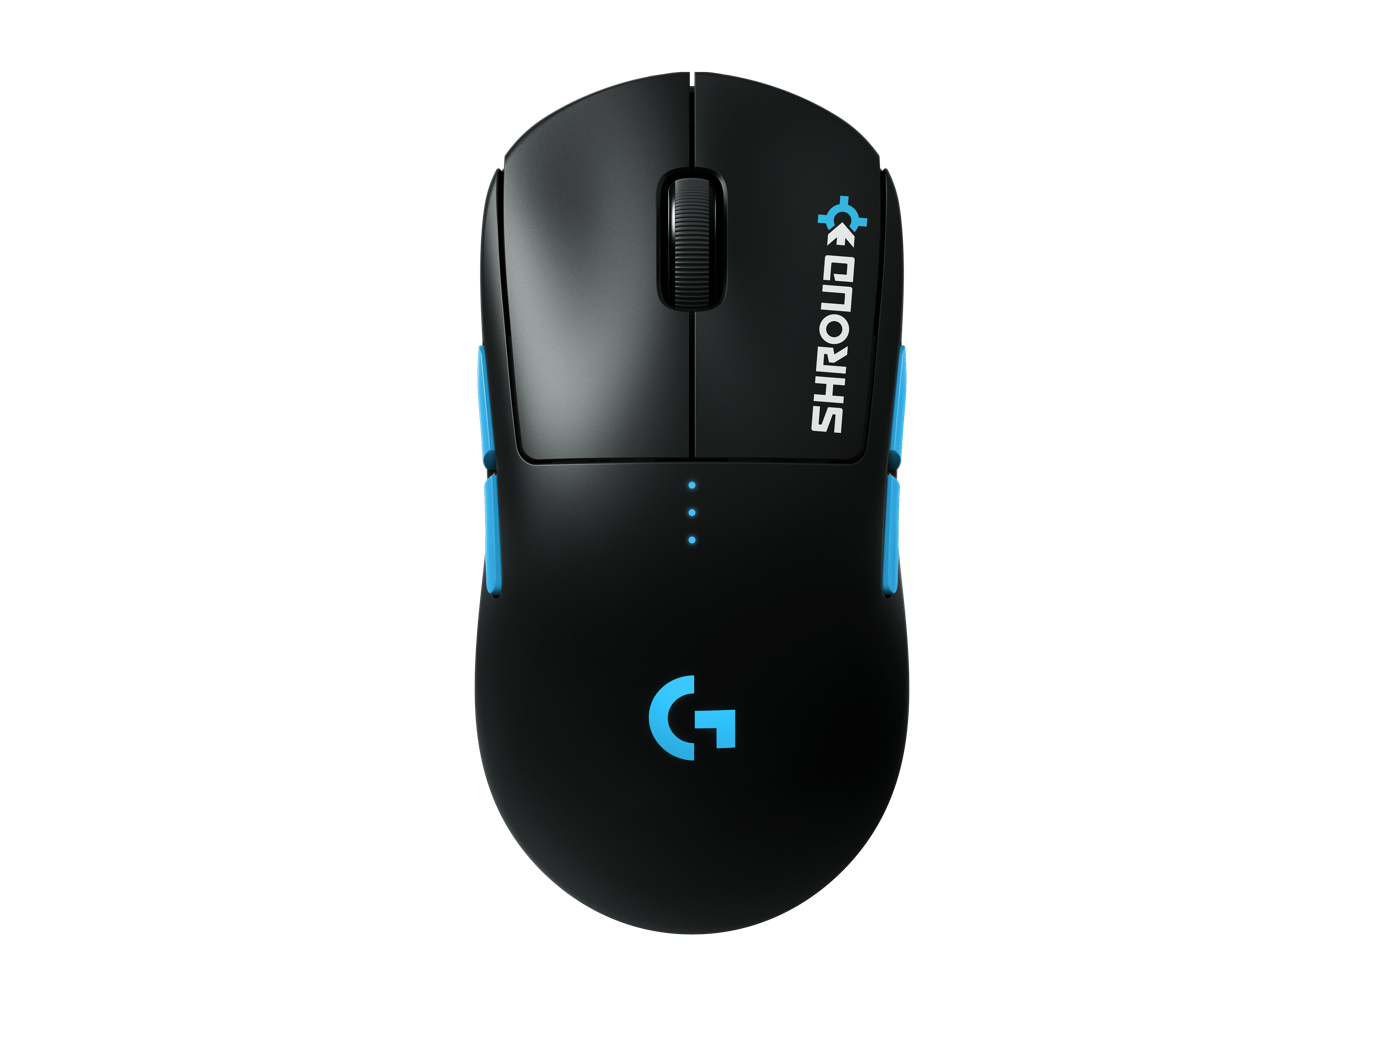 Necklet Validering Ubestemt Logitech G Pro Wireless Gaming Mouse for Esports Pros